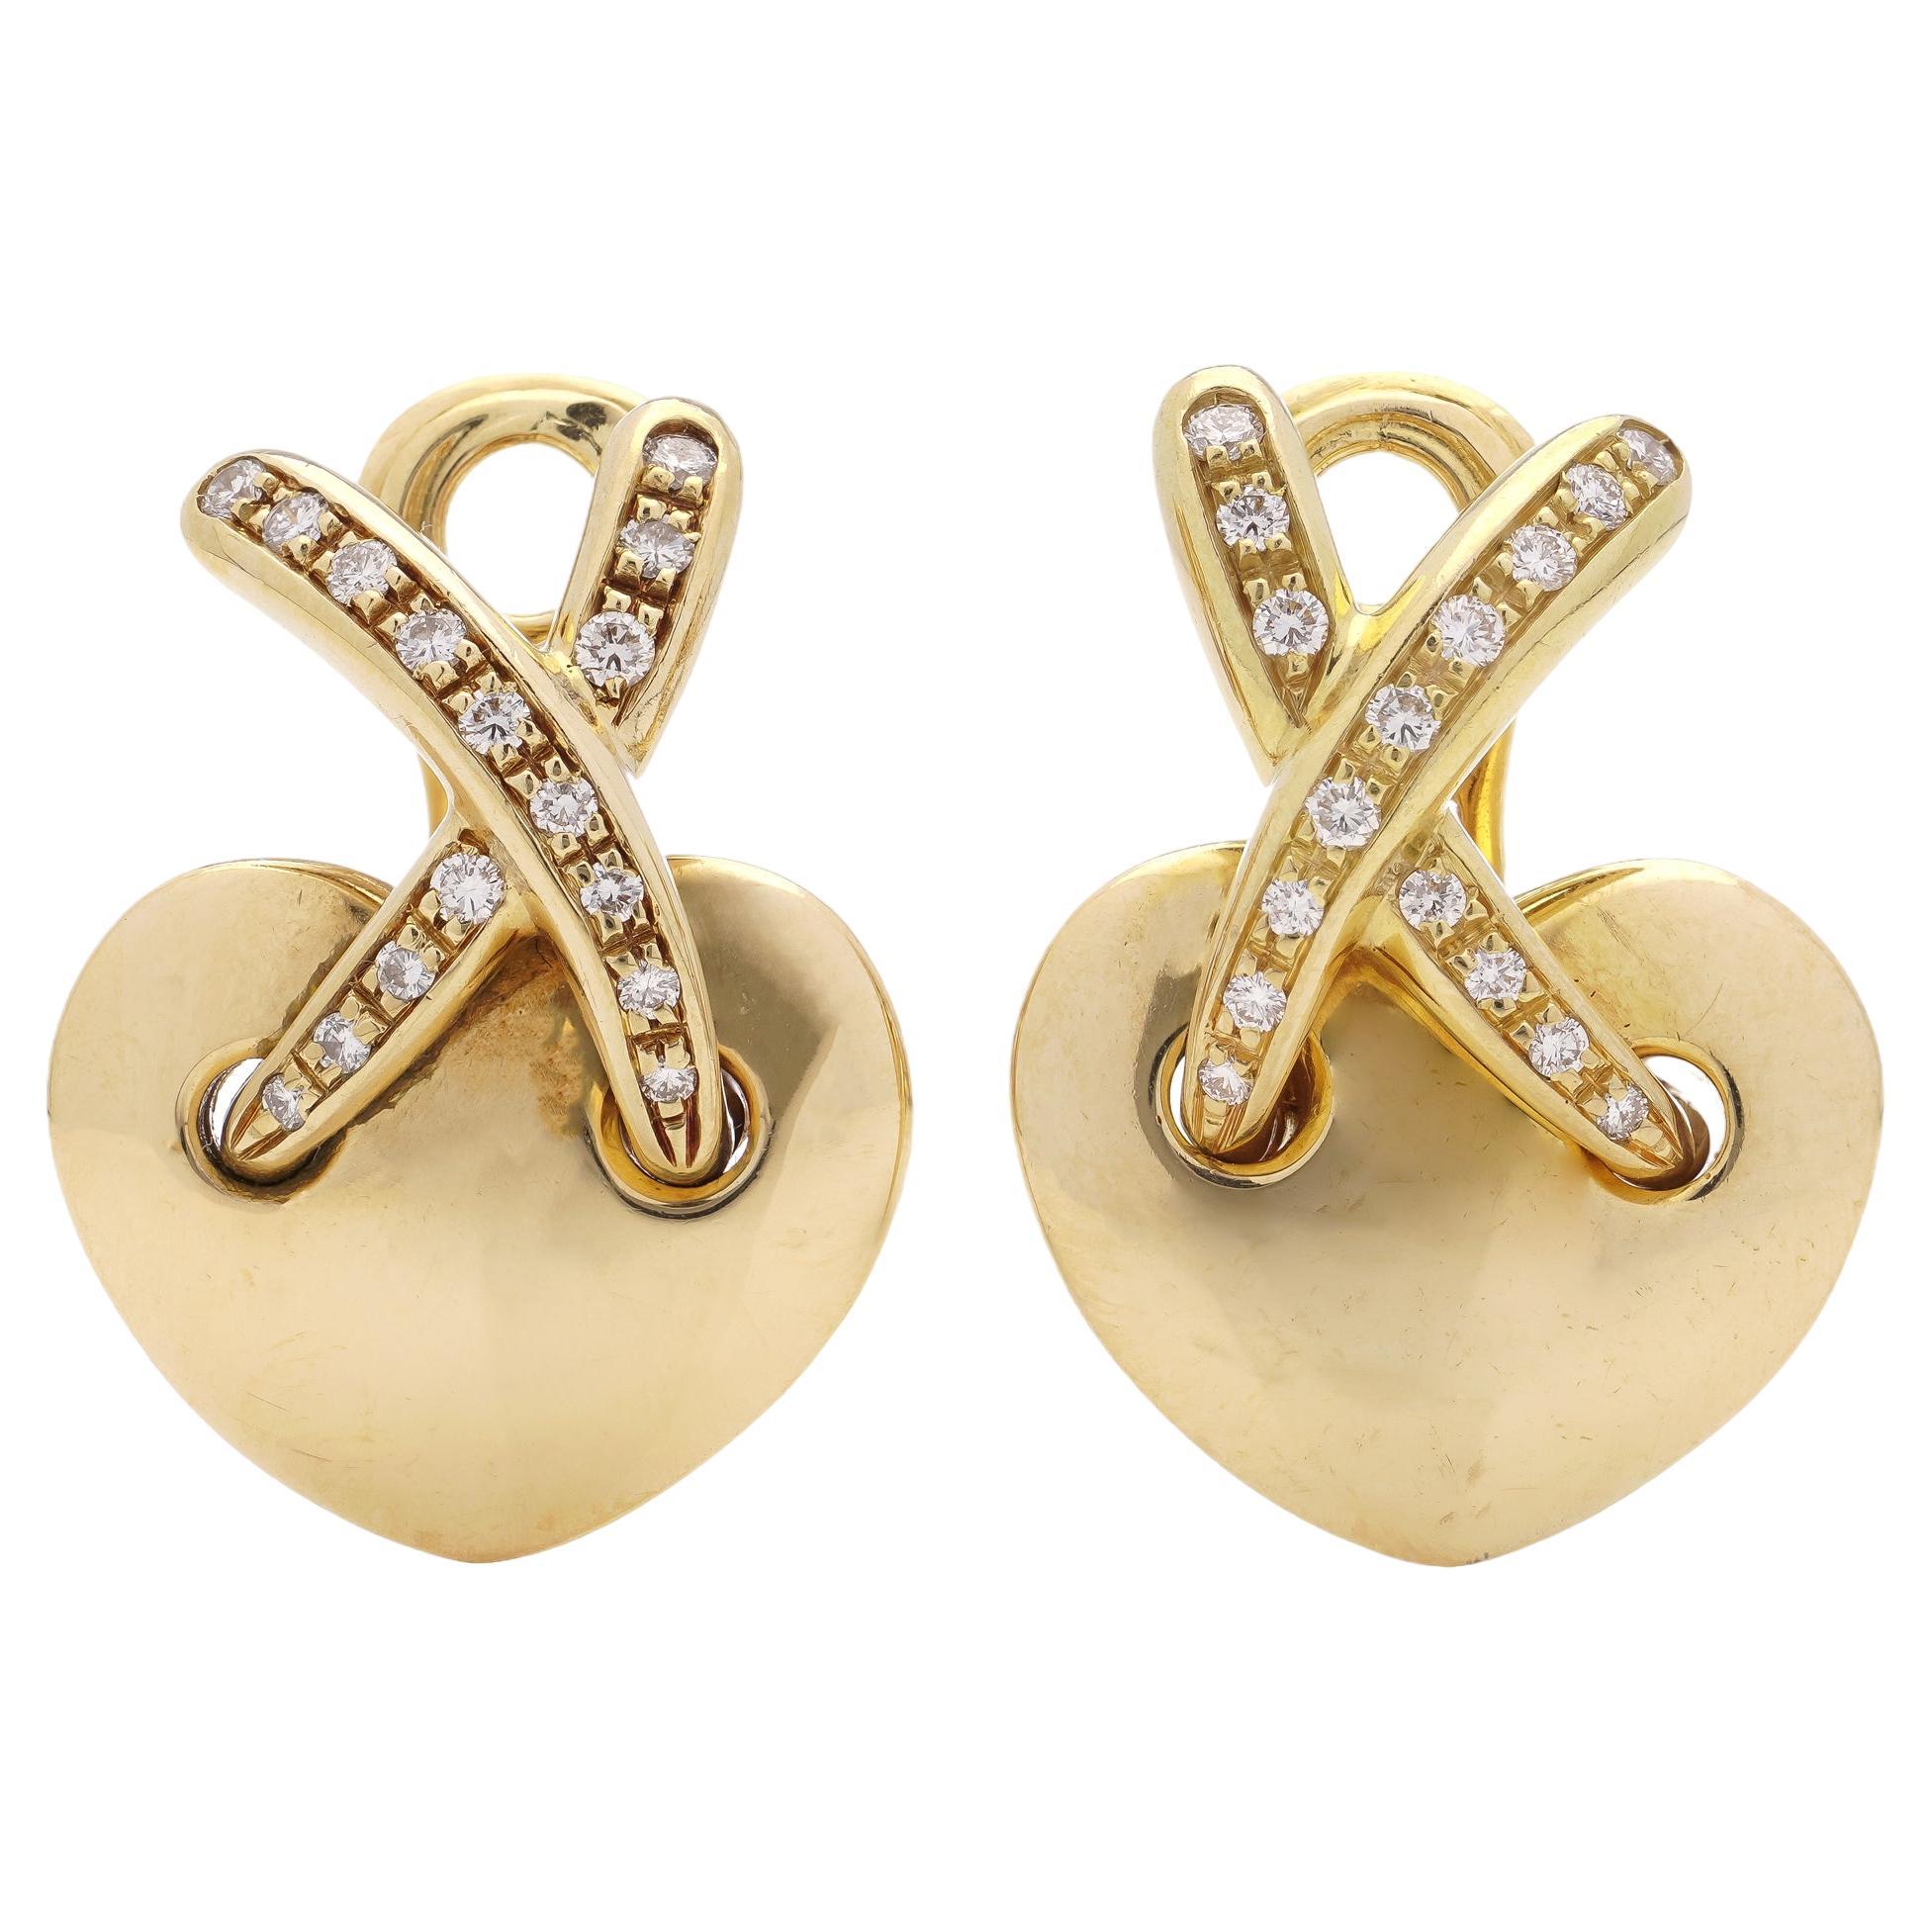 Chaumet 18kt. yellow gold pair of heart-shaped clip-on earrings